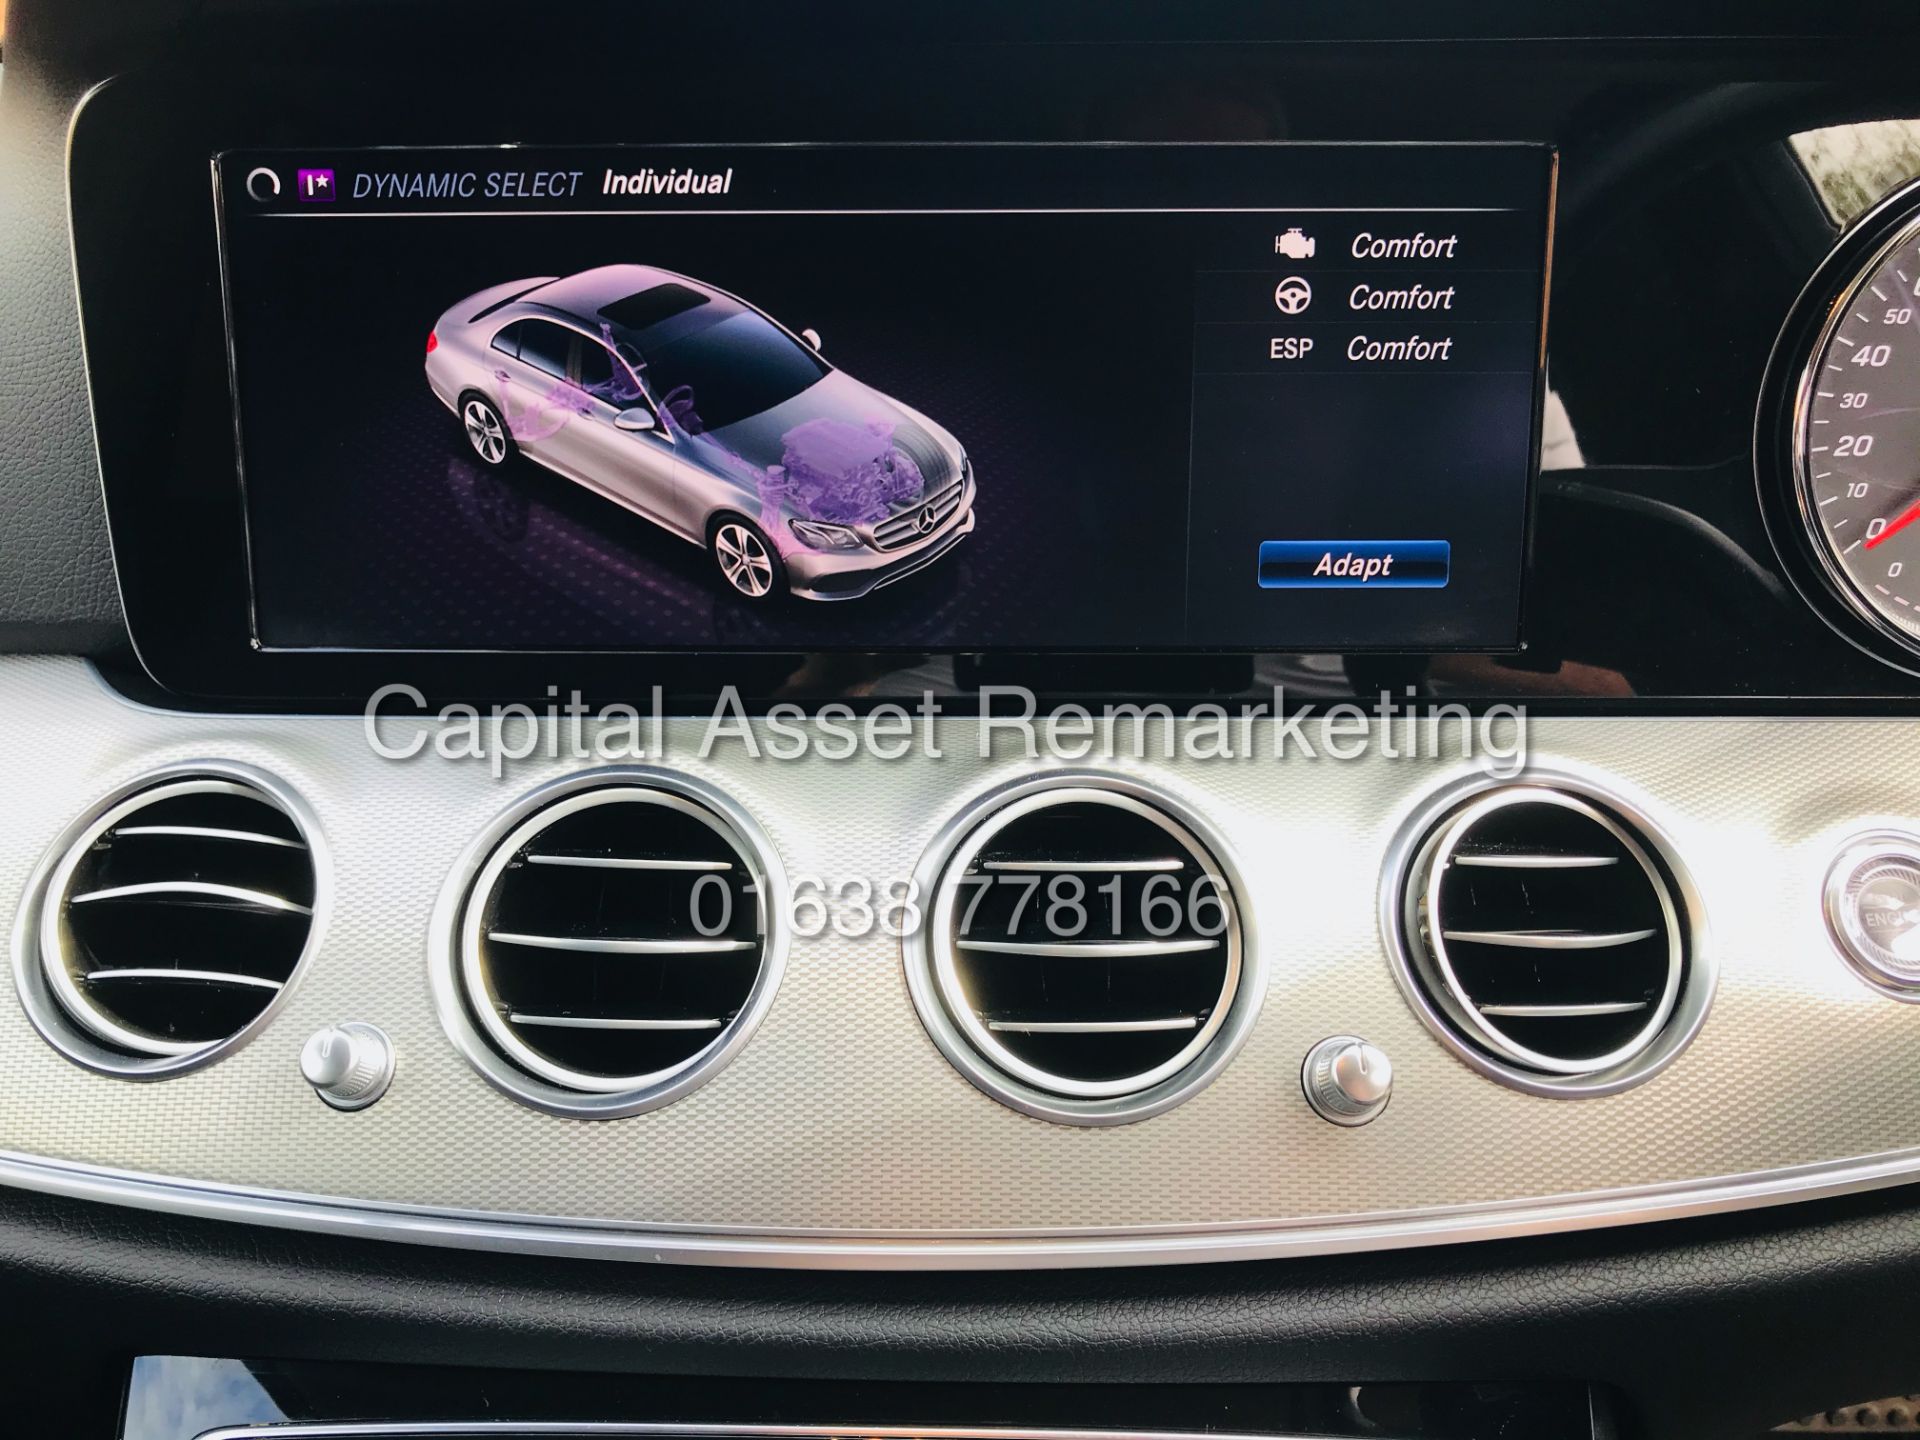 (On Sale) MERCEDES E220d "SPECIAL EQUIPMENT" AUTO (2019) 1 OWNER *GREAT SPEC* TAKE A PEEK - Image 29 of 35